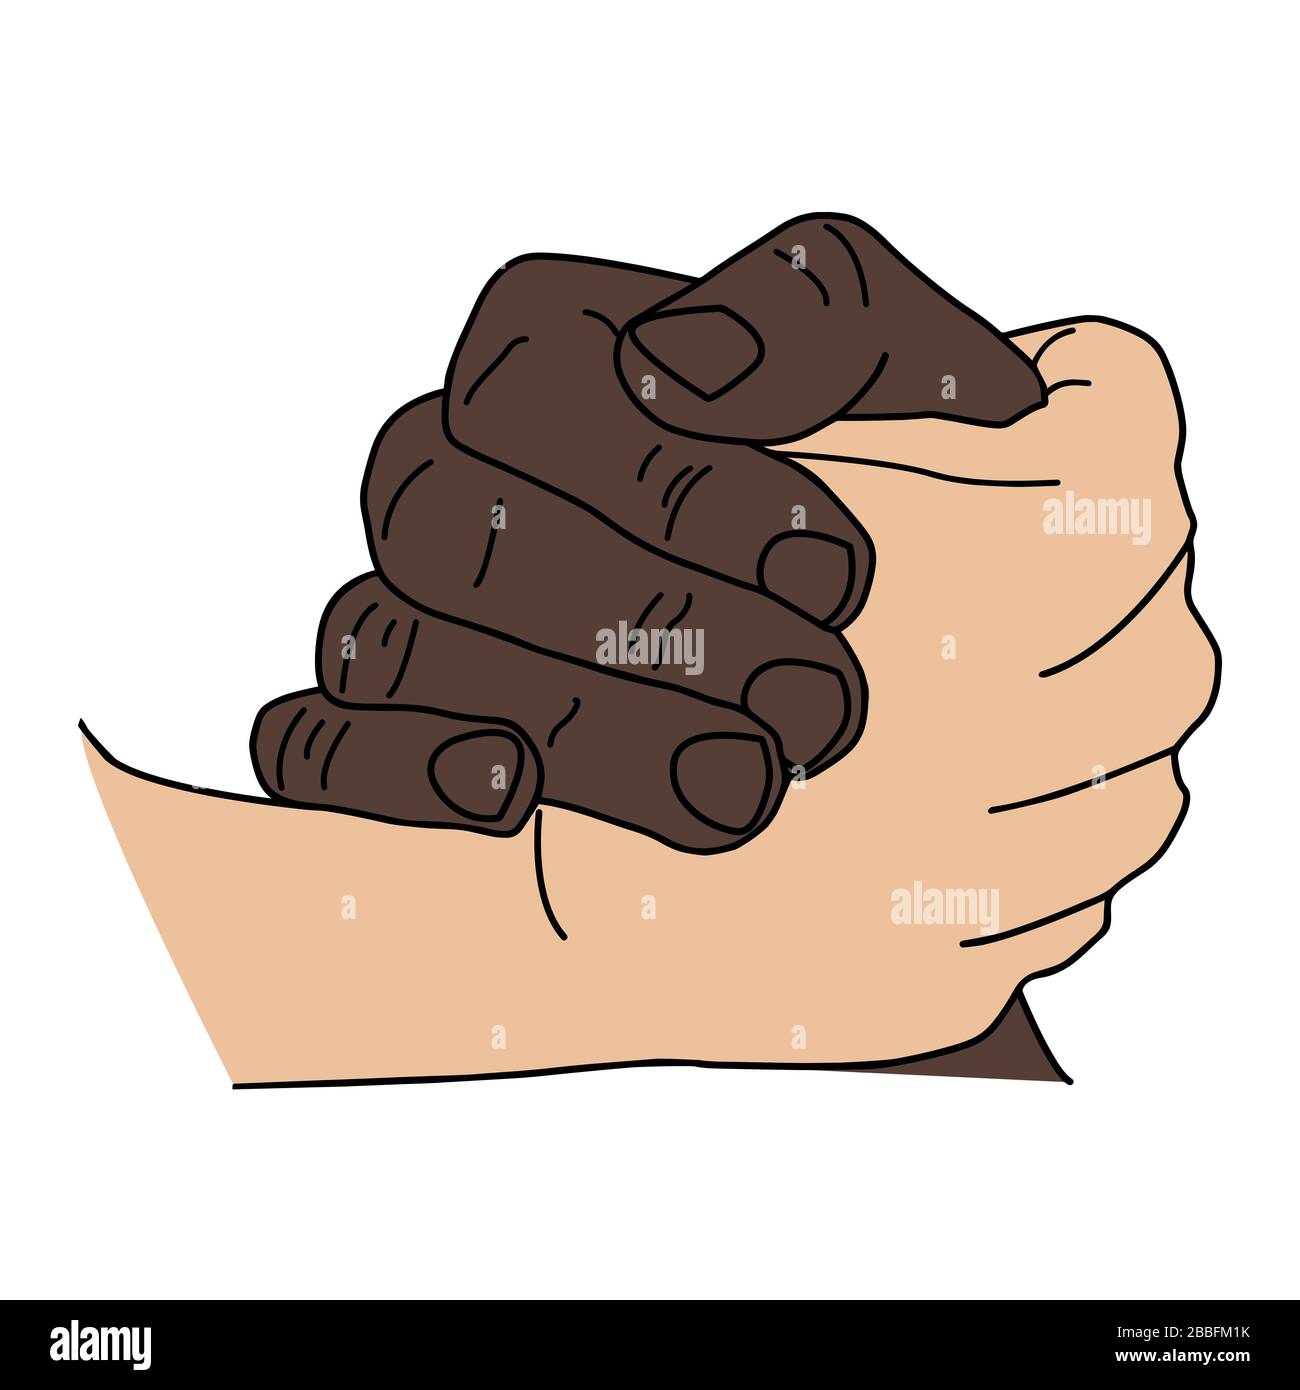 Multiracial holding hands, peace, friendship concept between multi ethnic people. Handshake gesture, white caucasian and black african american hand. Stock Vector